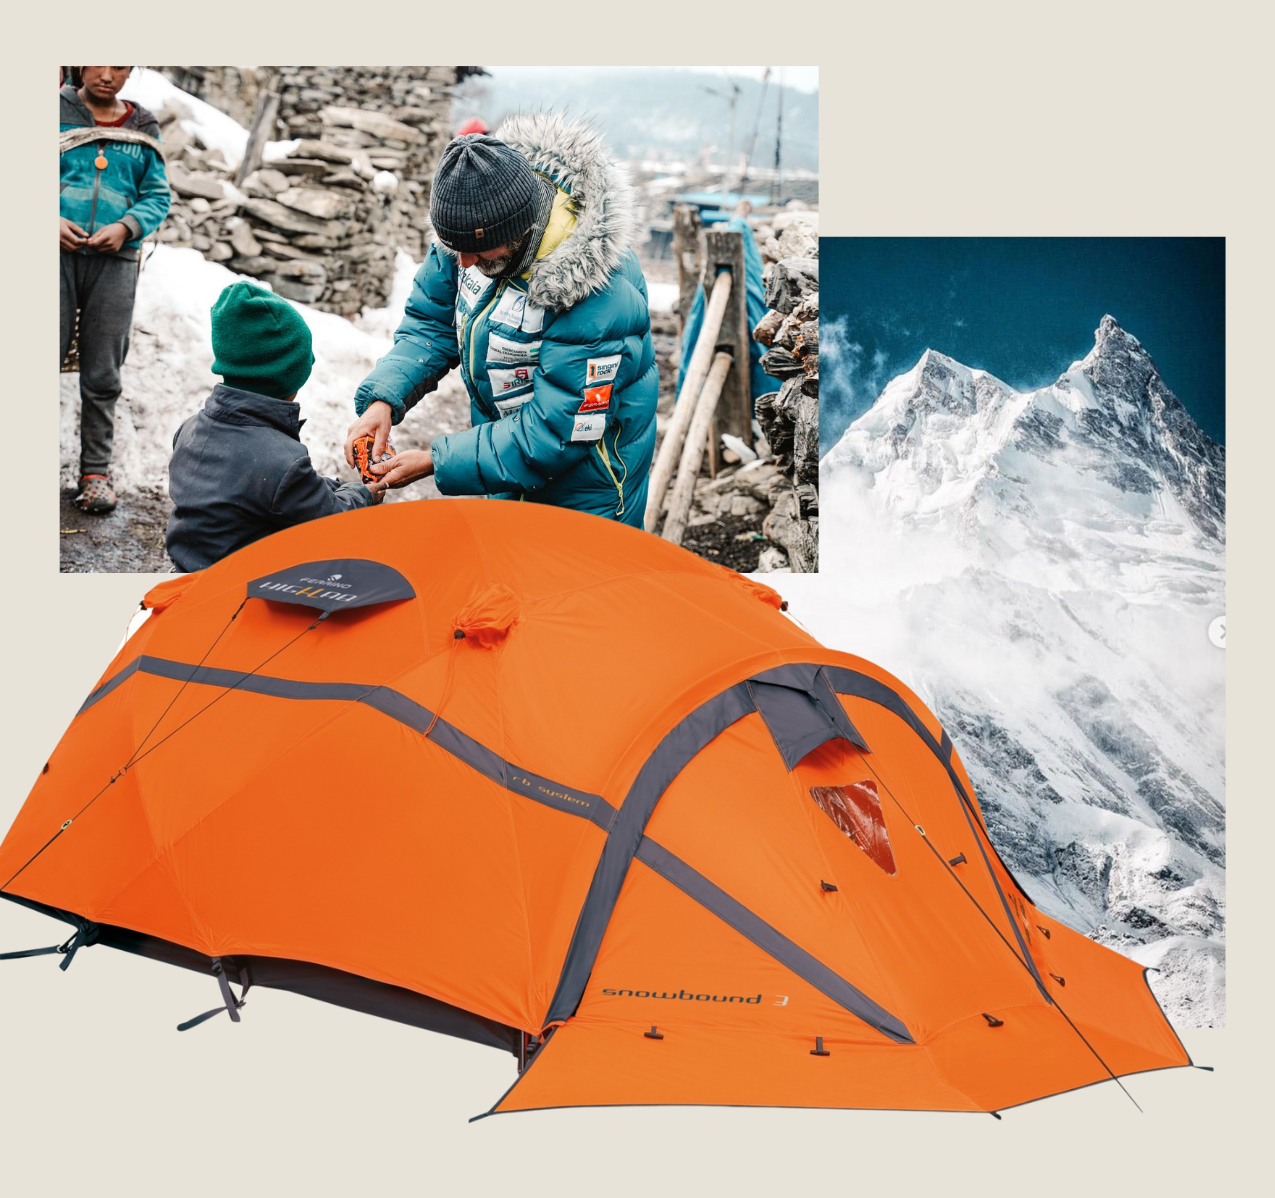 SNOWBOUND 2 TENT - FOR UPPER CAMPS